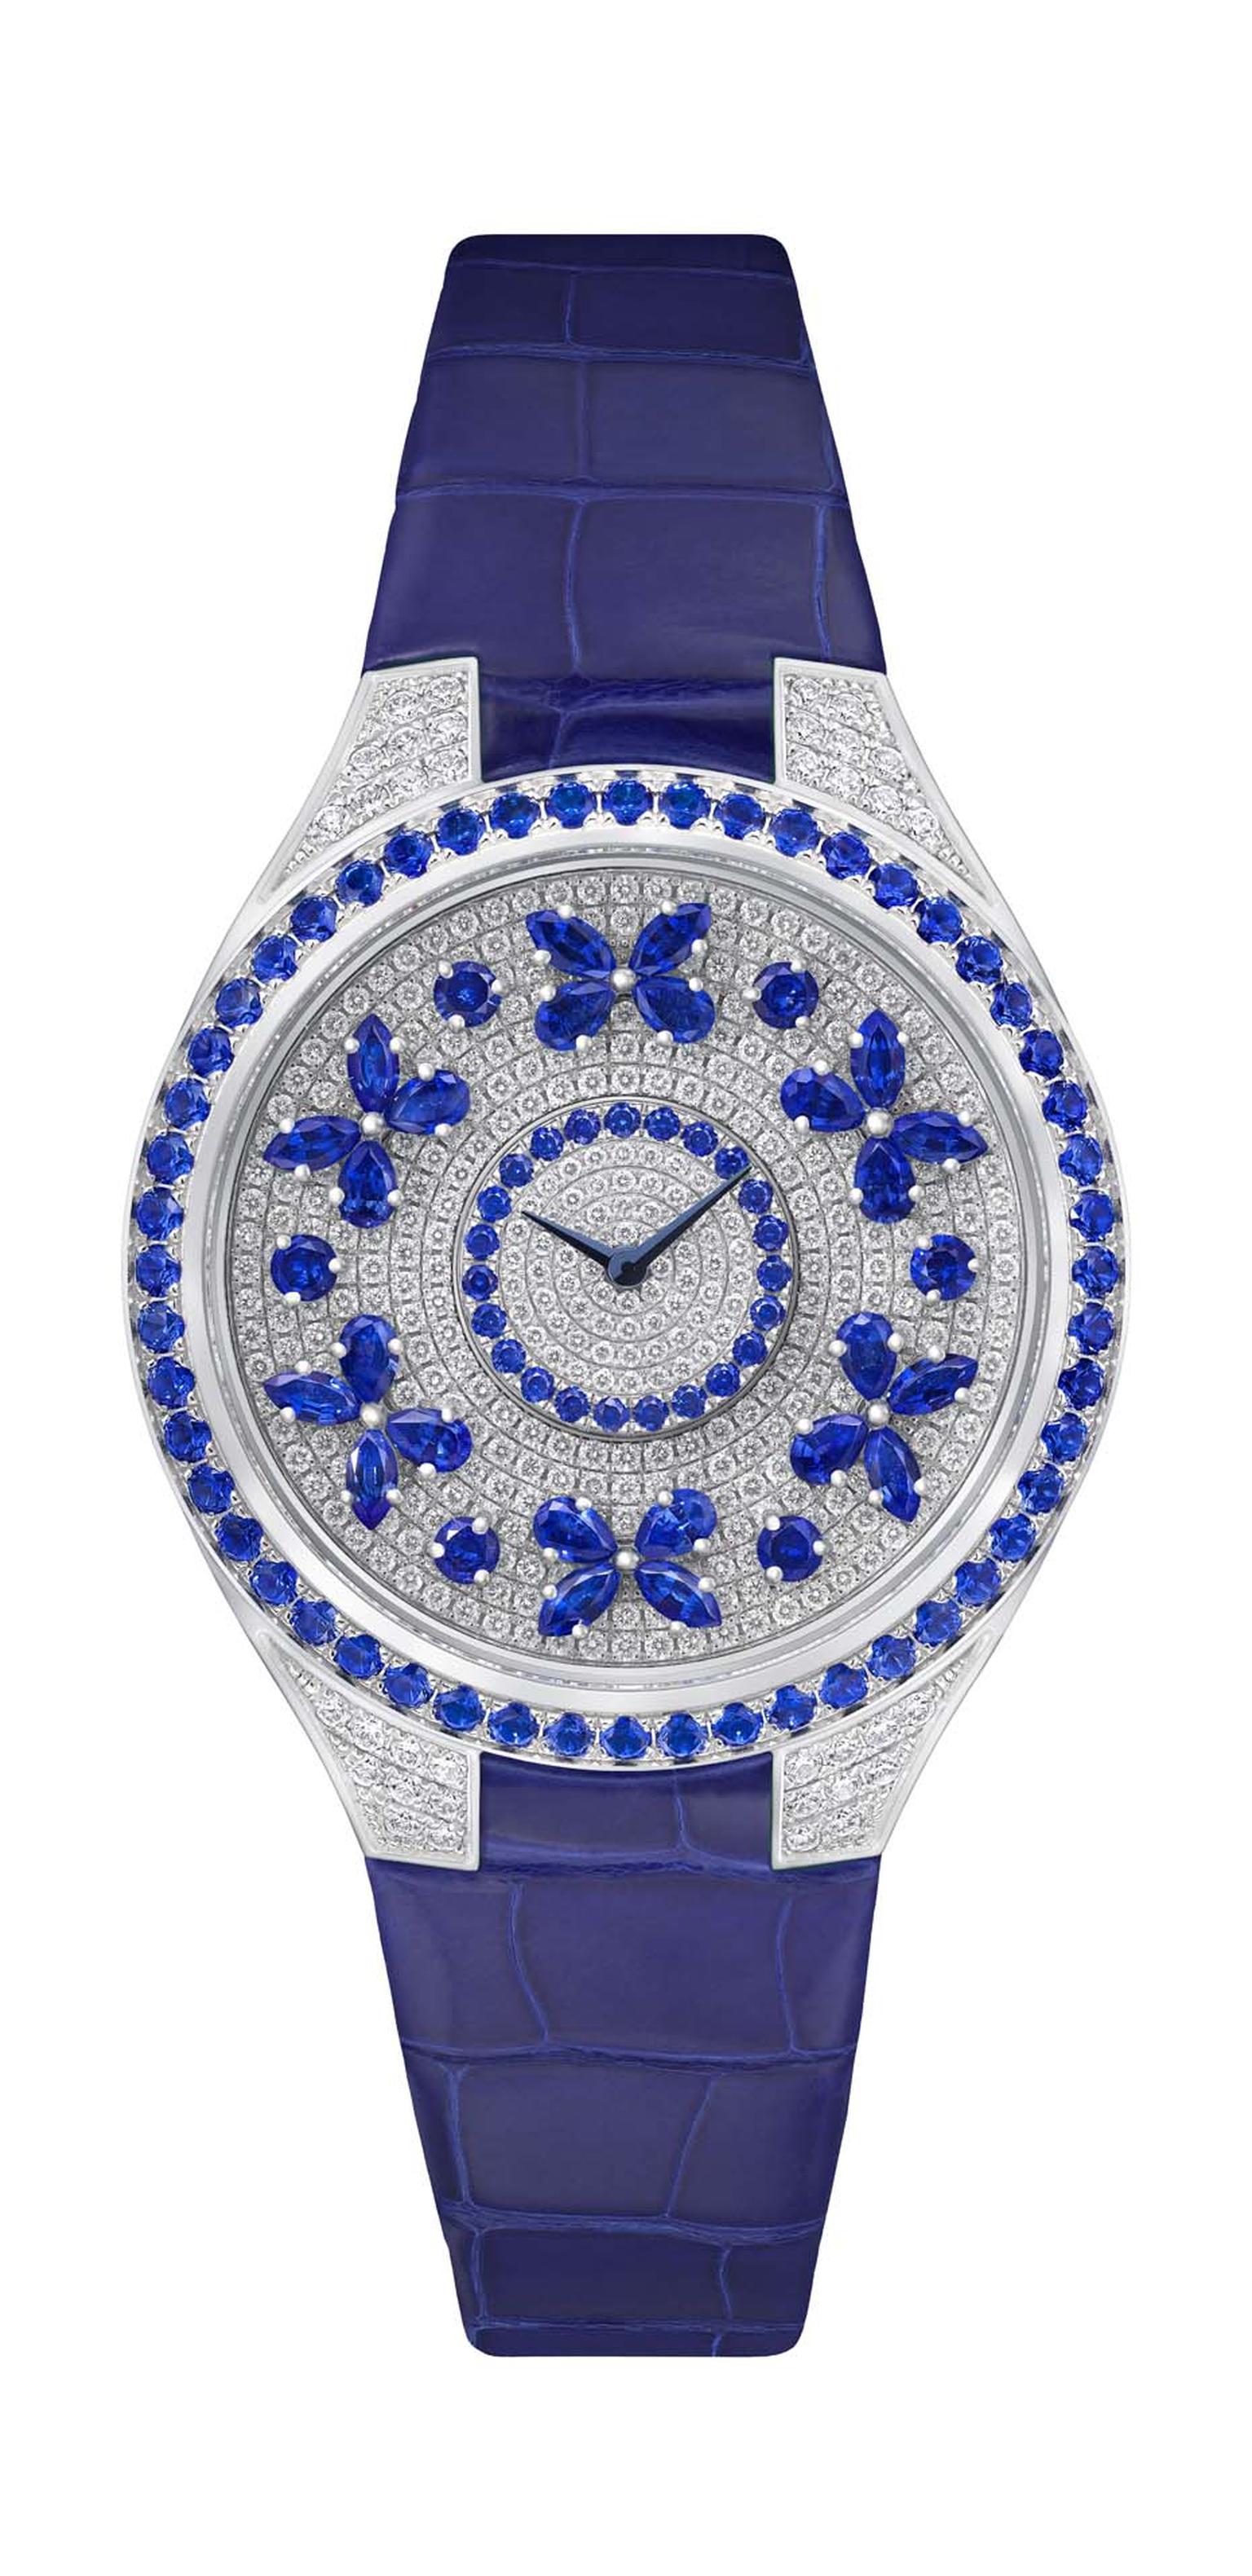 Butterfly and fish watches_Graff_Butterfly disco white and sapphire diamond watch.jpg